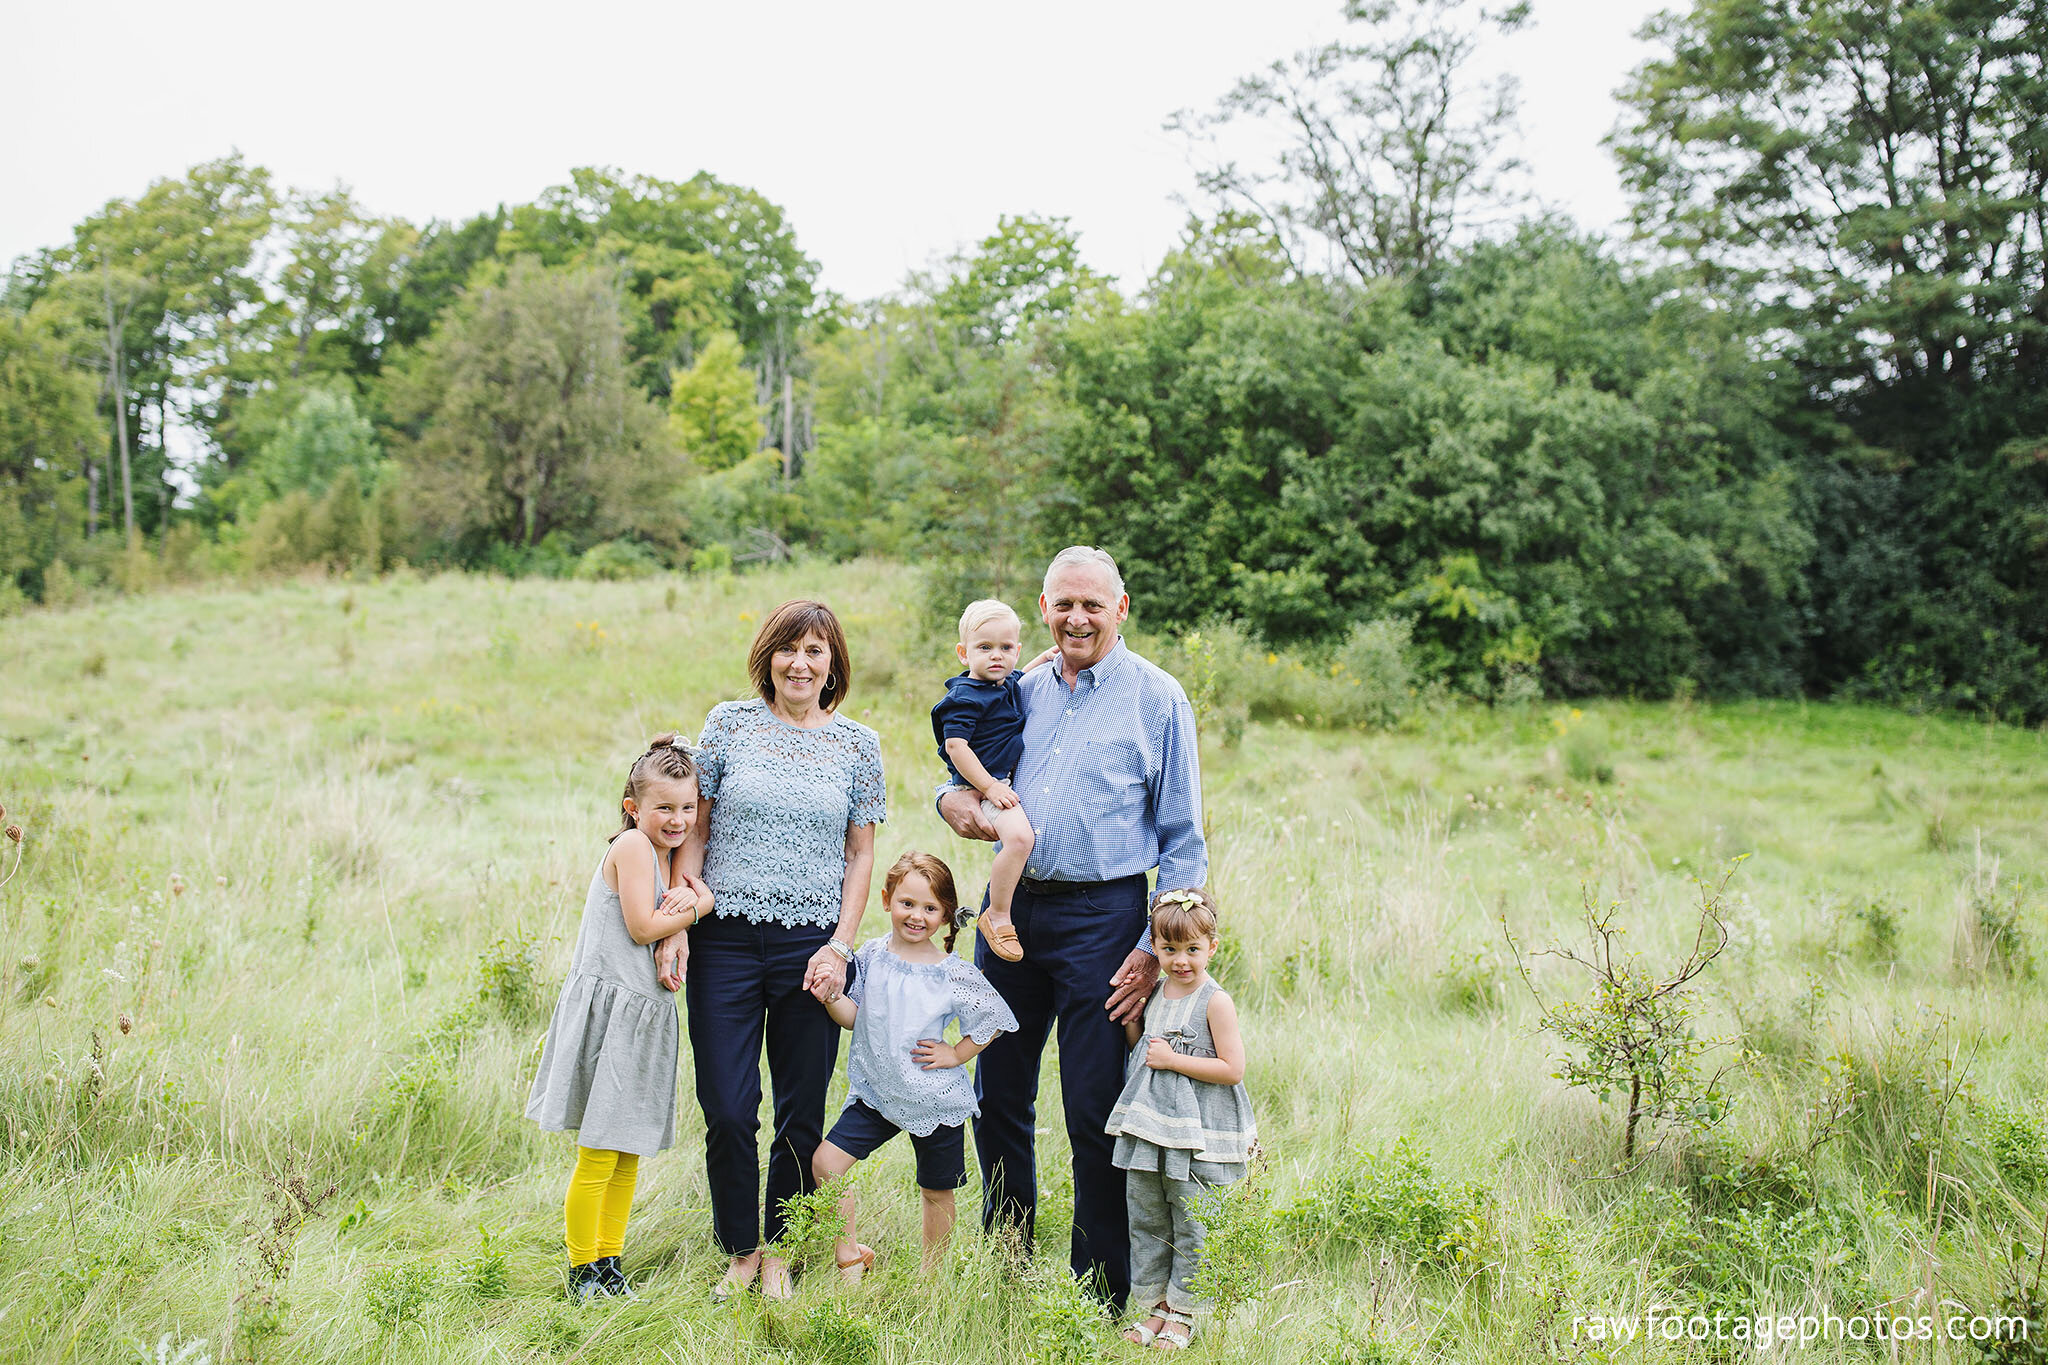 raw_footage_photography-london_ontario_family_photographer-woodsy_extended_family_session-grandparents-002.jpg